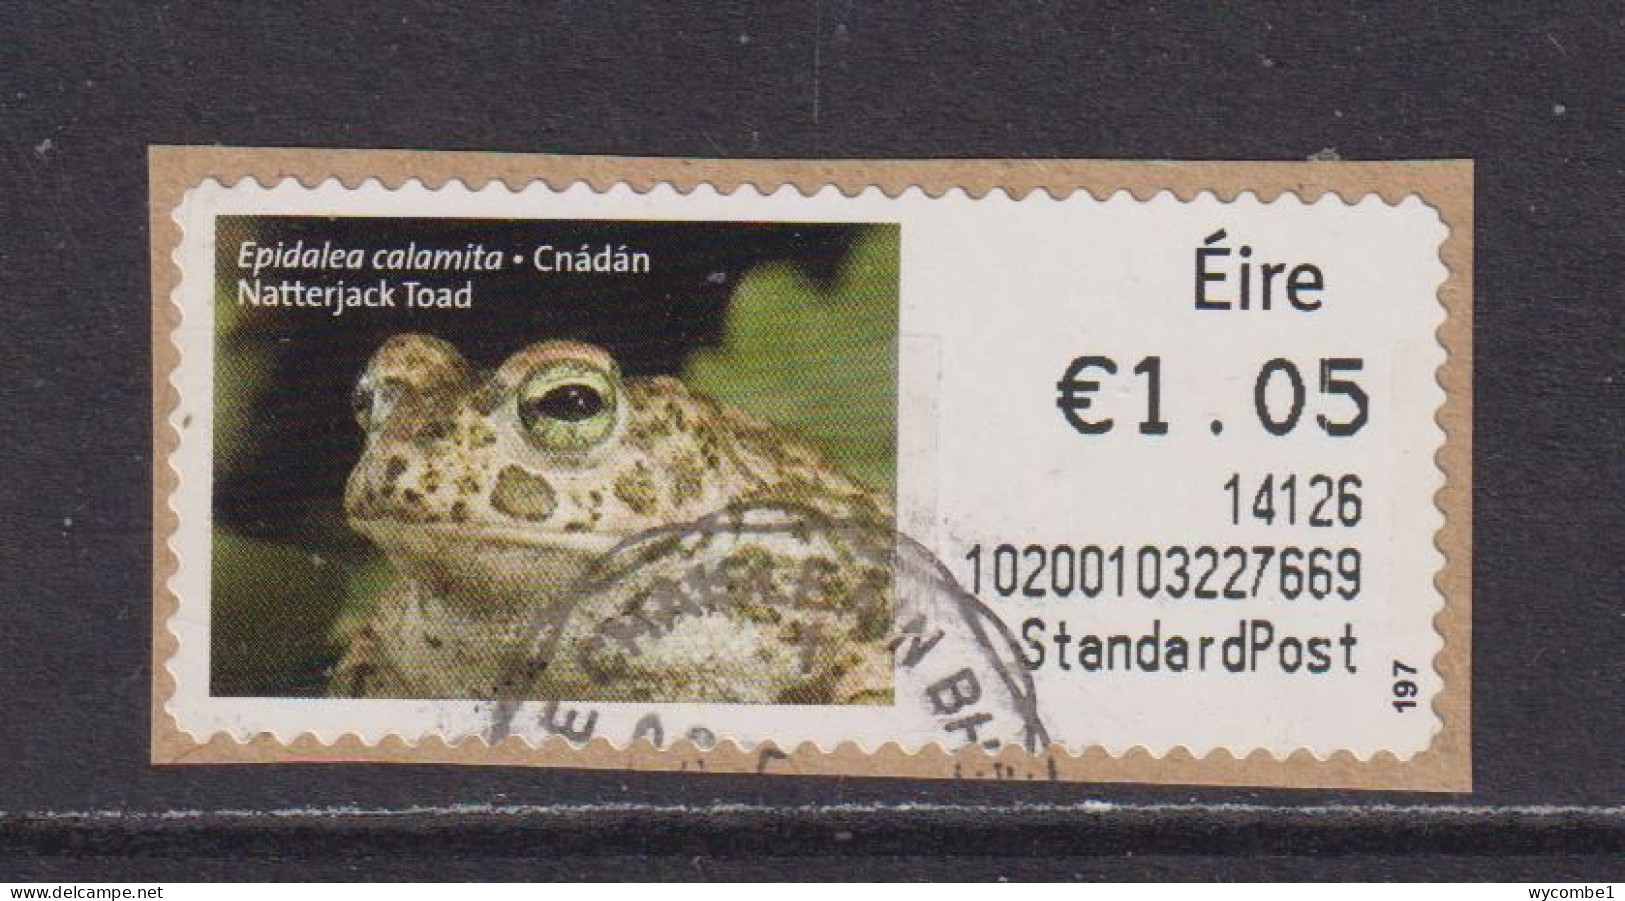 IRELAND  -  2013 Natterjack Toad SOAR (Stamp On A Roll)  CDS  Used On Piece As Scan - Oblitérés